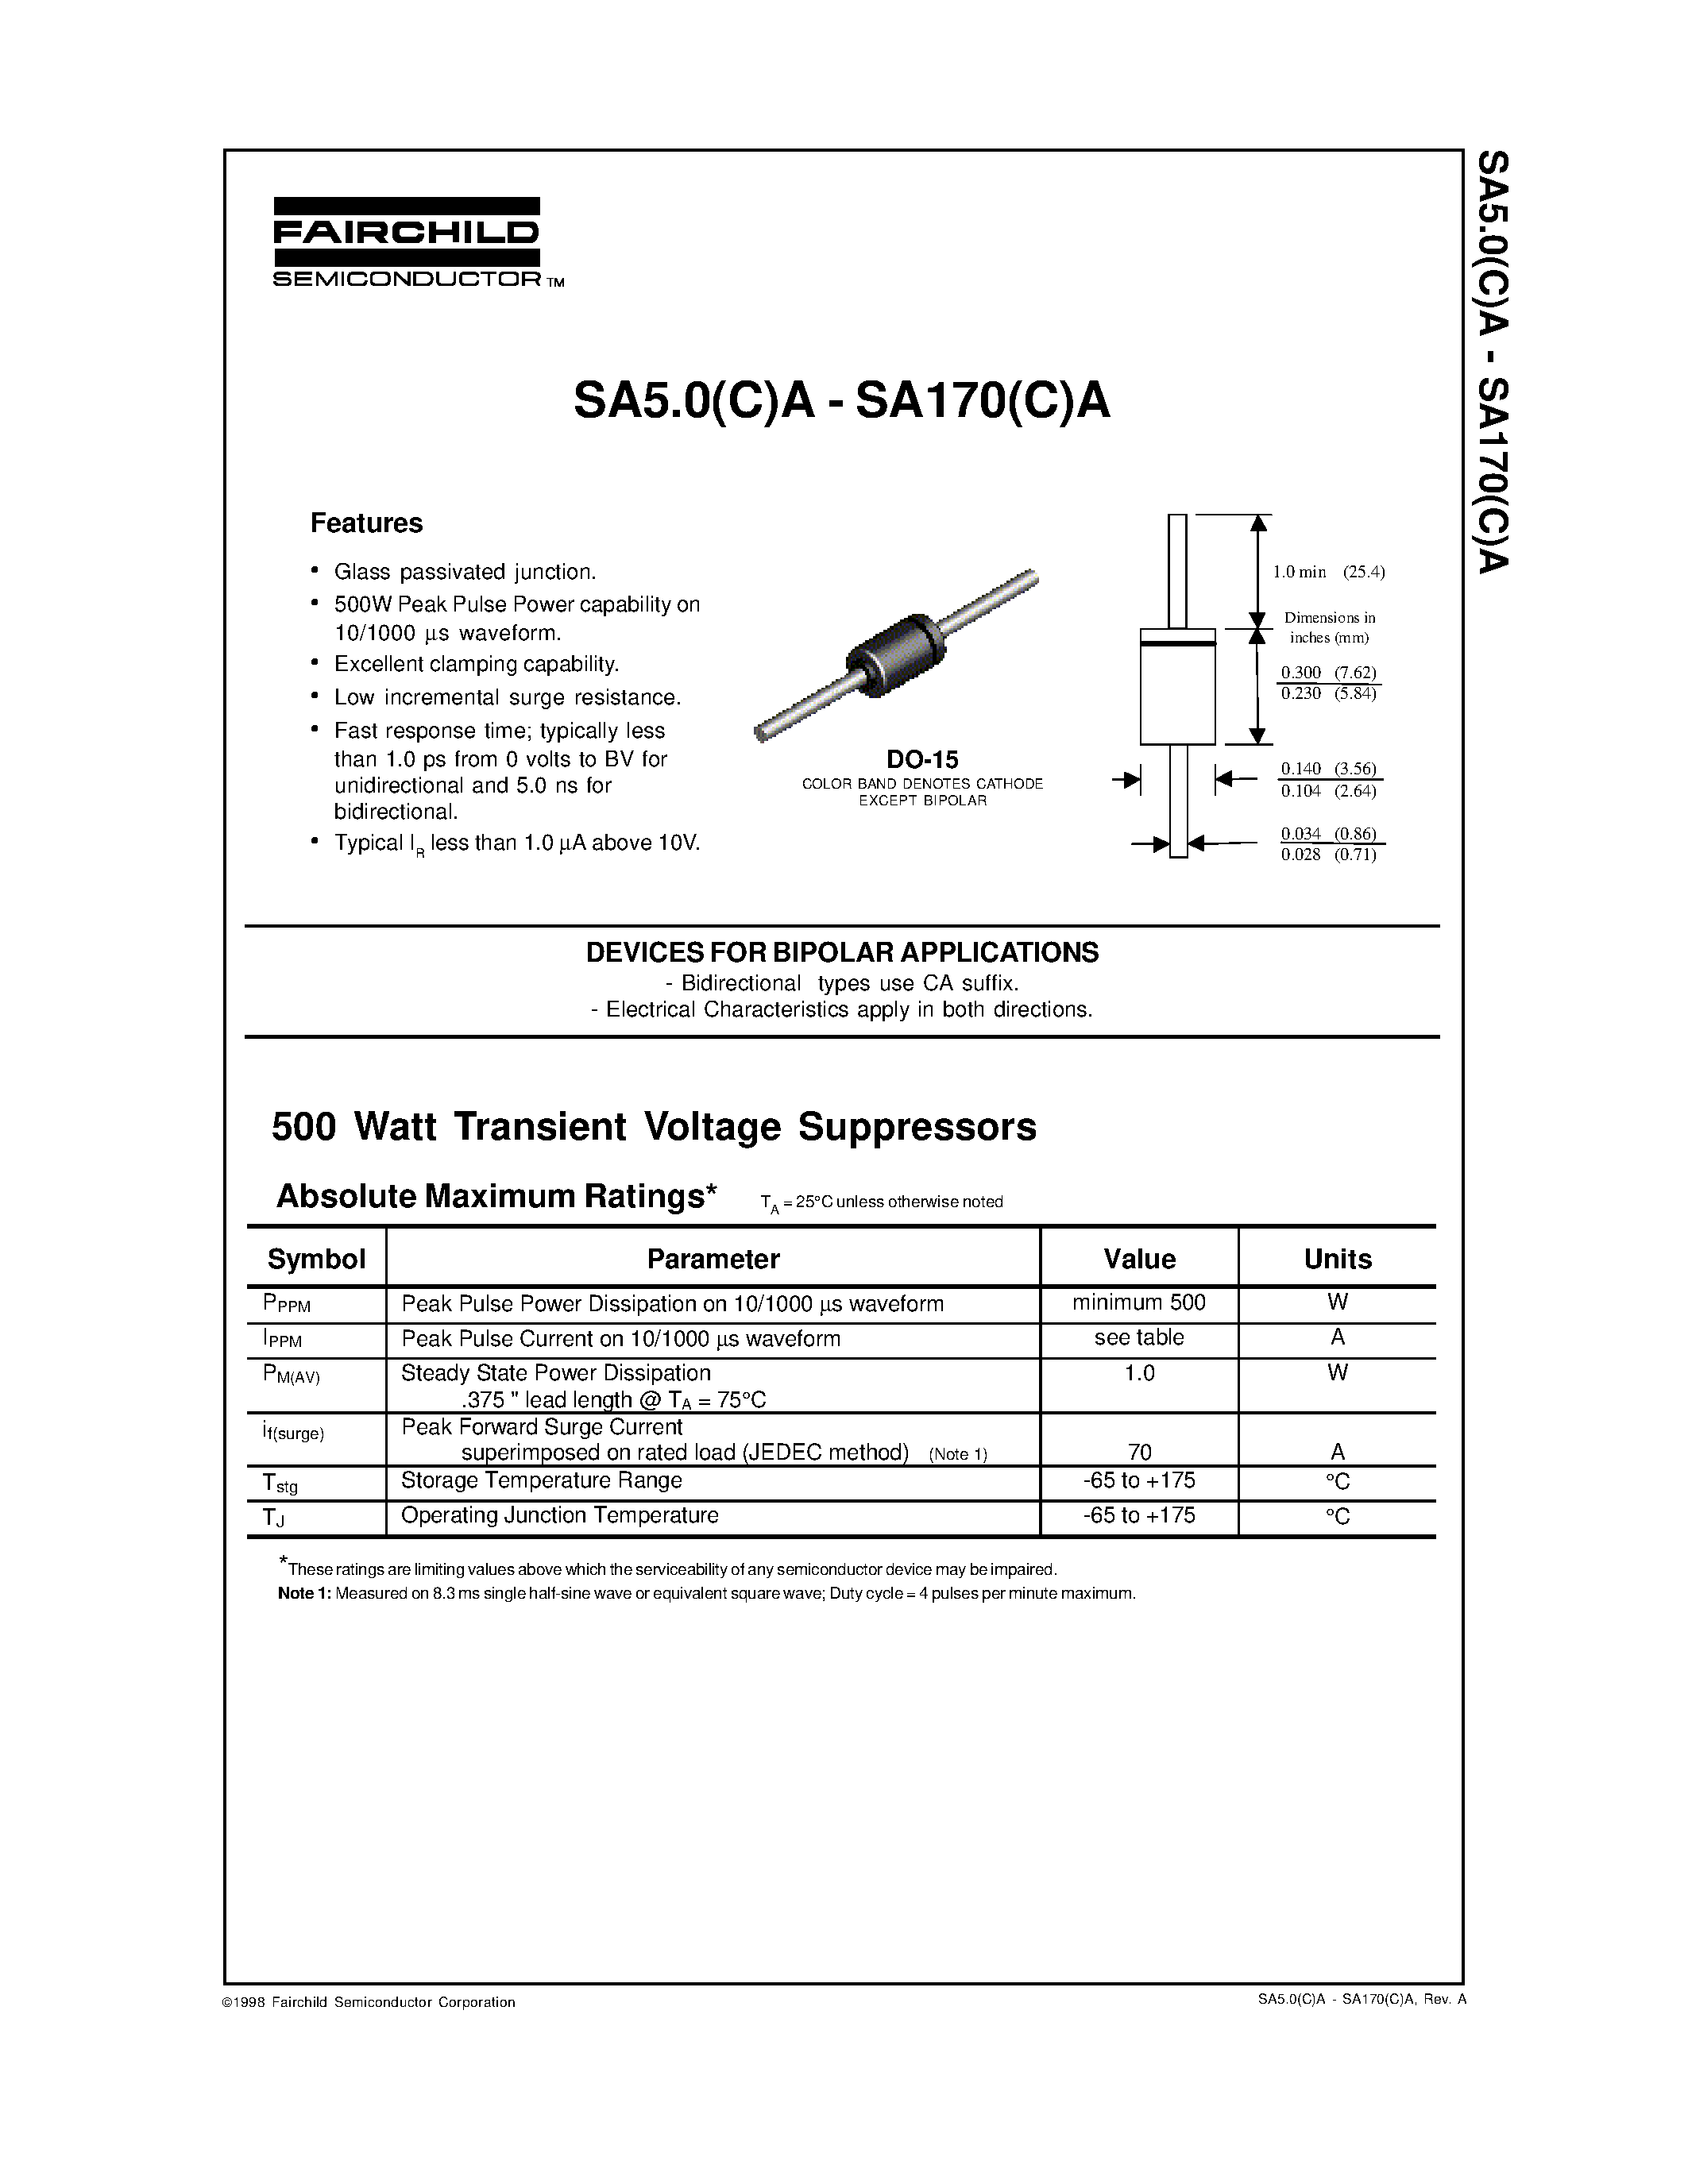 Datasheet SA20(C)A - DEVICES FOR BIPOLAR APPLICATIONS page 1